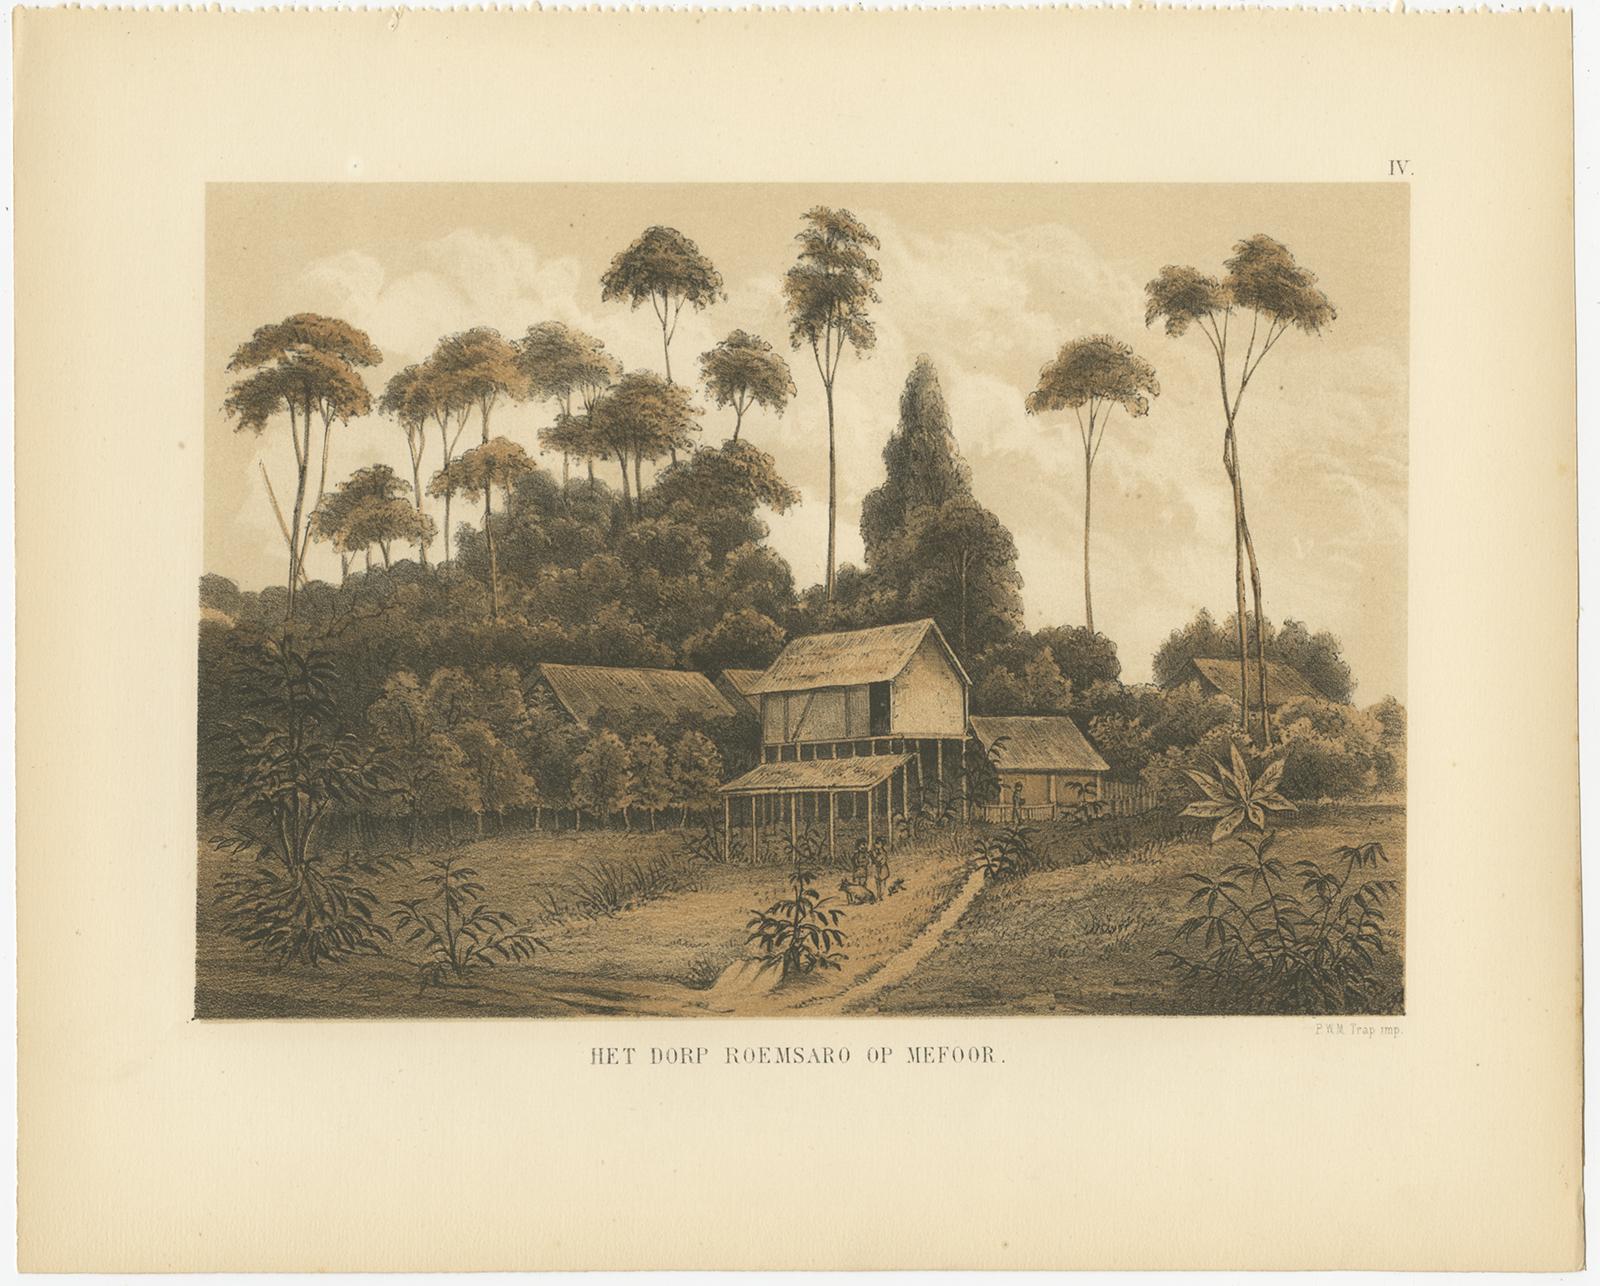 Paper Set of 21 Antique Prints Illustrating the Travels to Cenderawasih Bay, 1875 For Sale